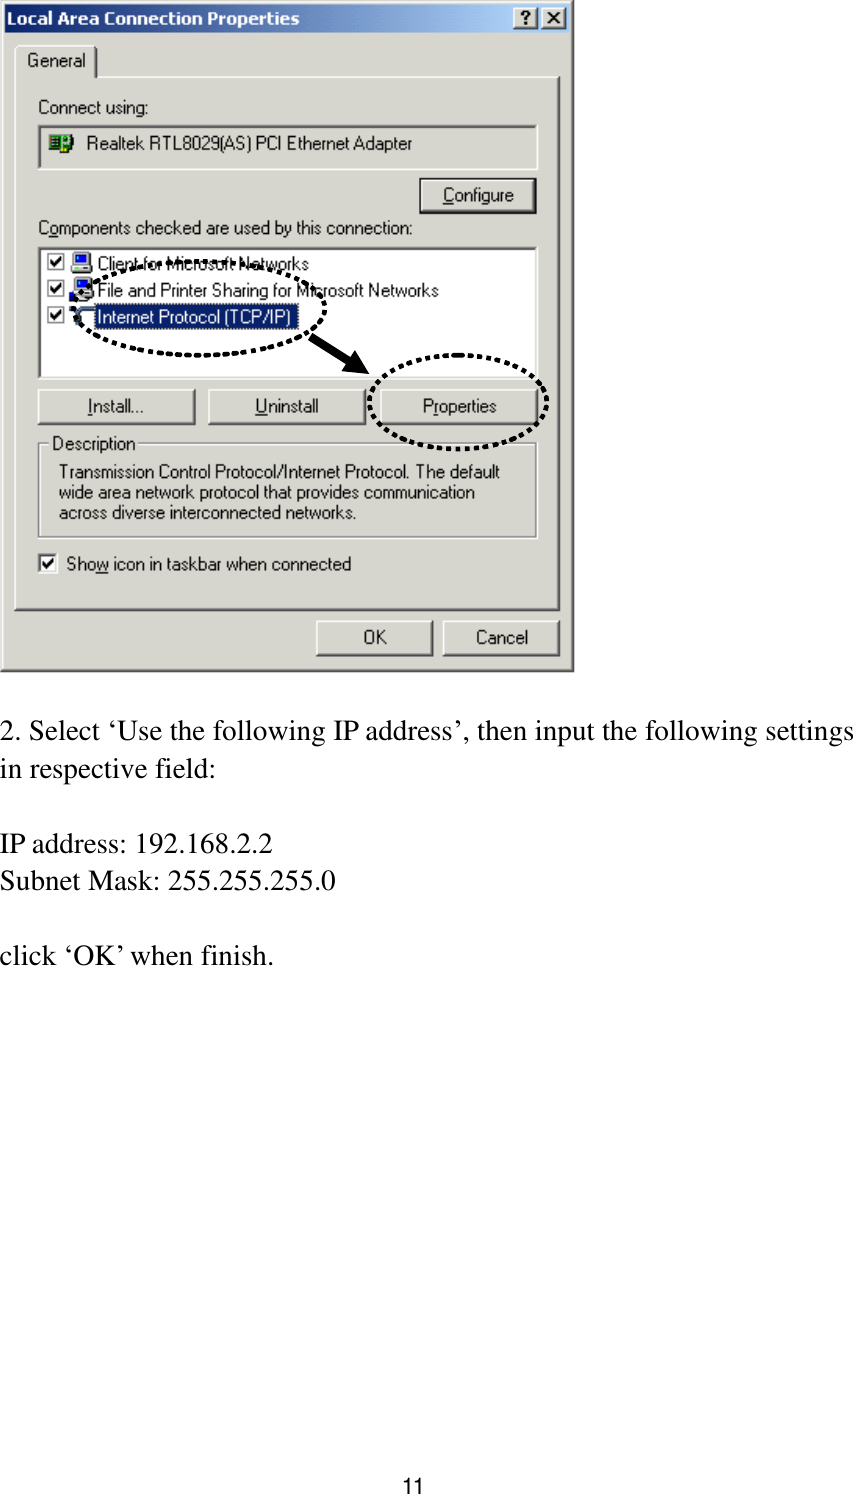 11   2. Select „Use the following IP address‟, then input the following settings in respective field:  IP address: 192.168.2.2 Subnet Mask: 255.255.255.0  click „OK‟ when finish.  